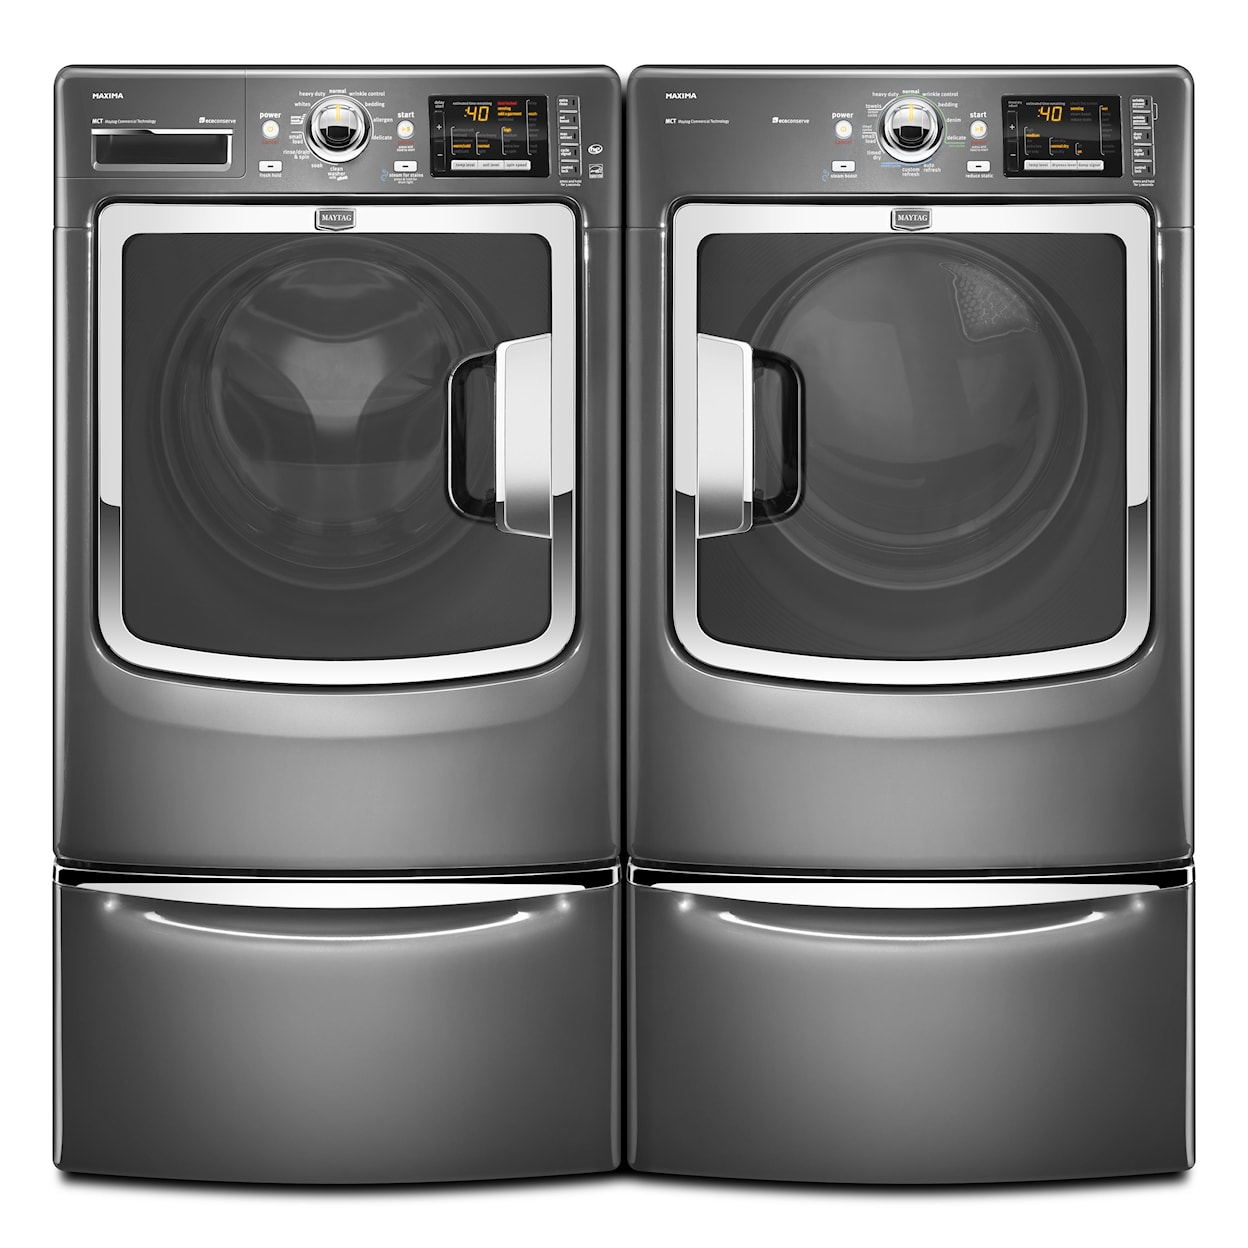 Maytag Gas Dryers 7.4 Cu. Ft. Front-Load Gas Dryer